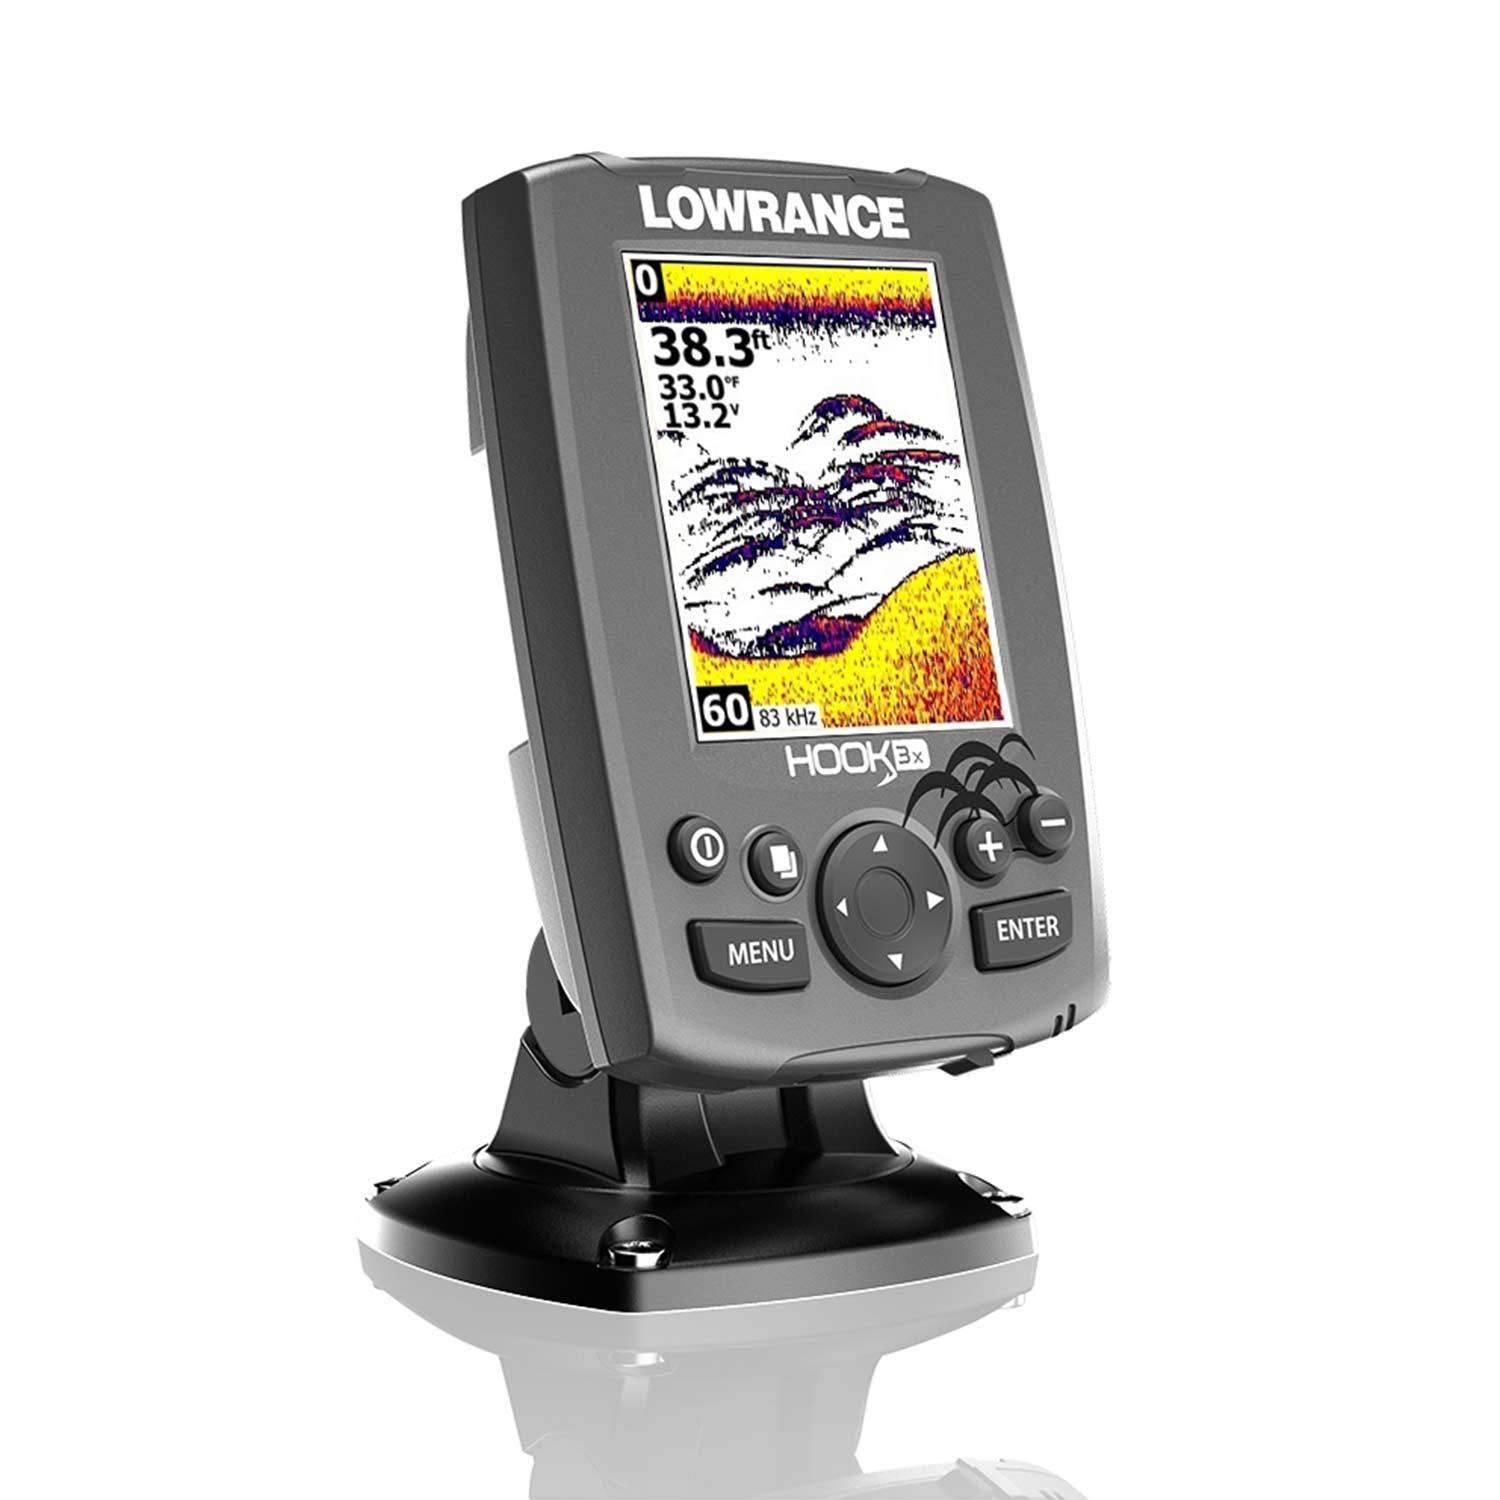 Hook-3x Fishfinder with Dual-Frequency Transducer